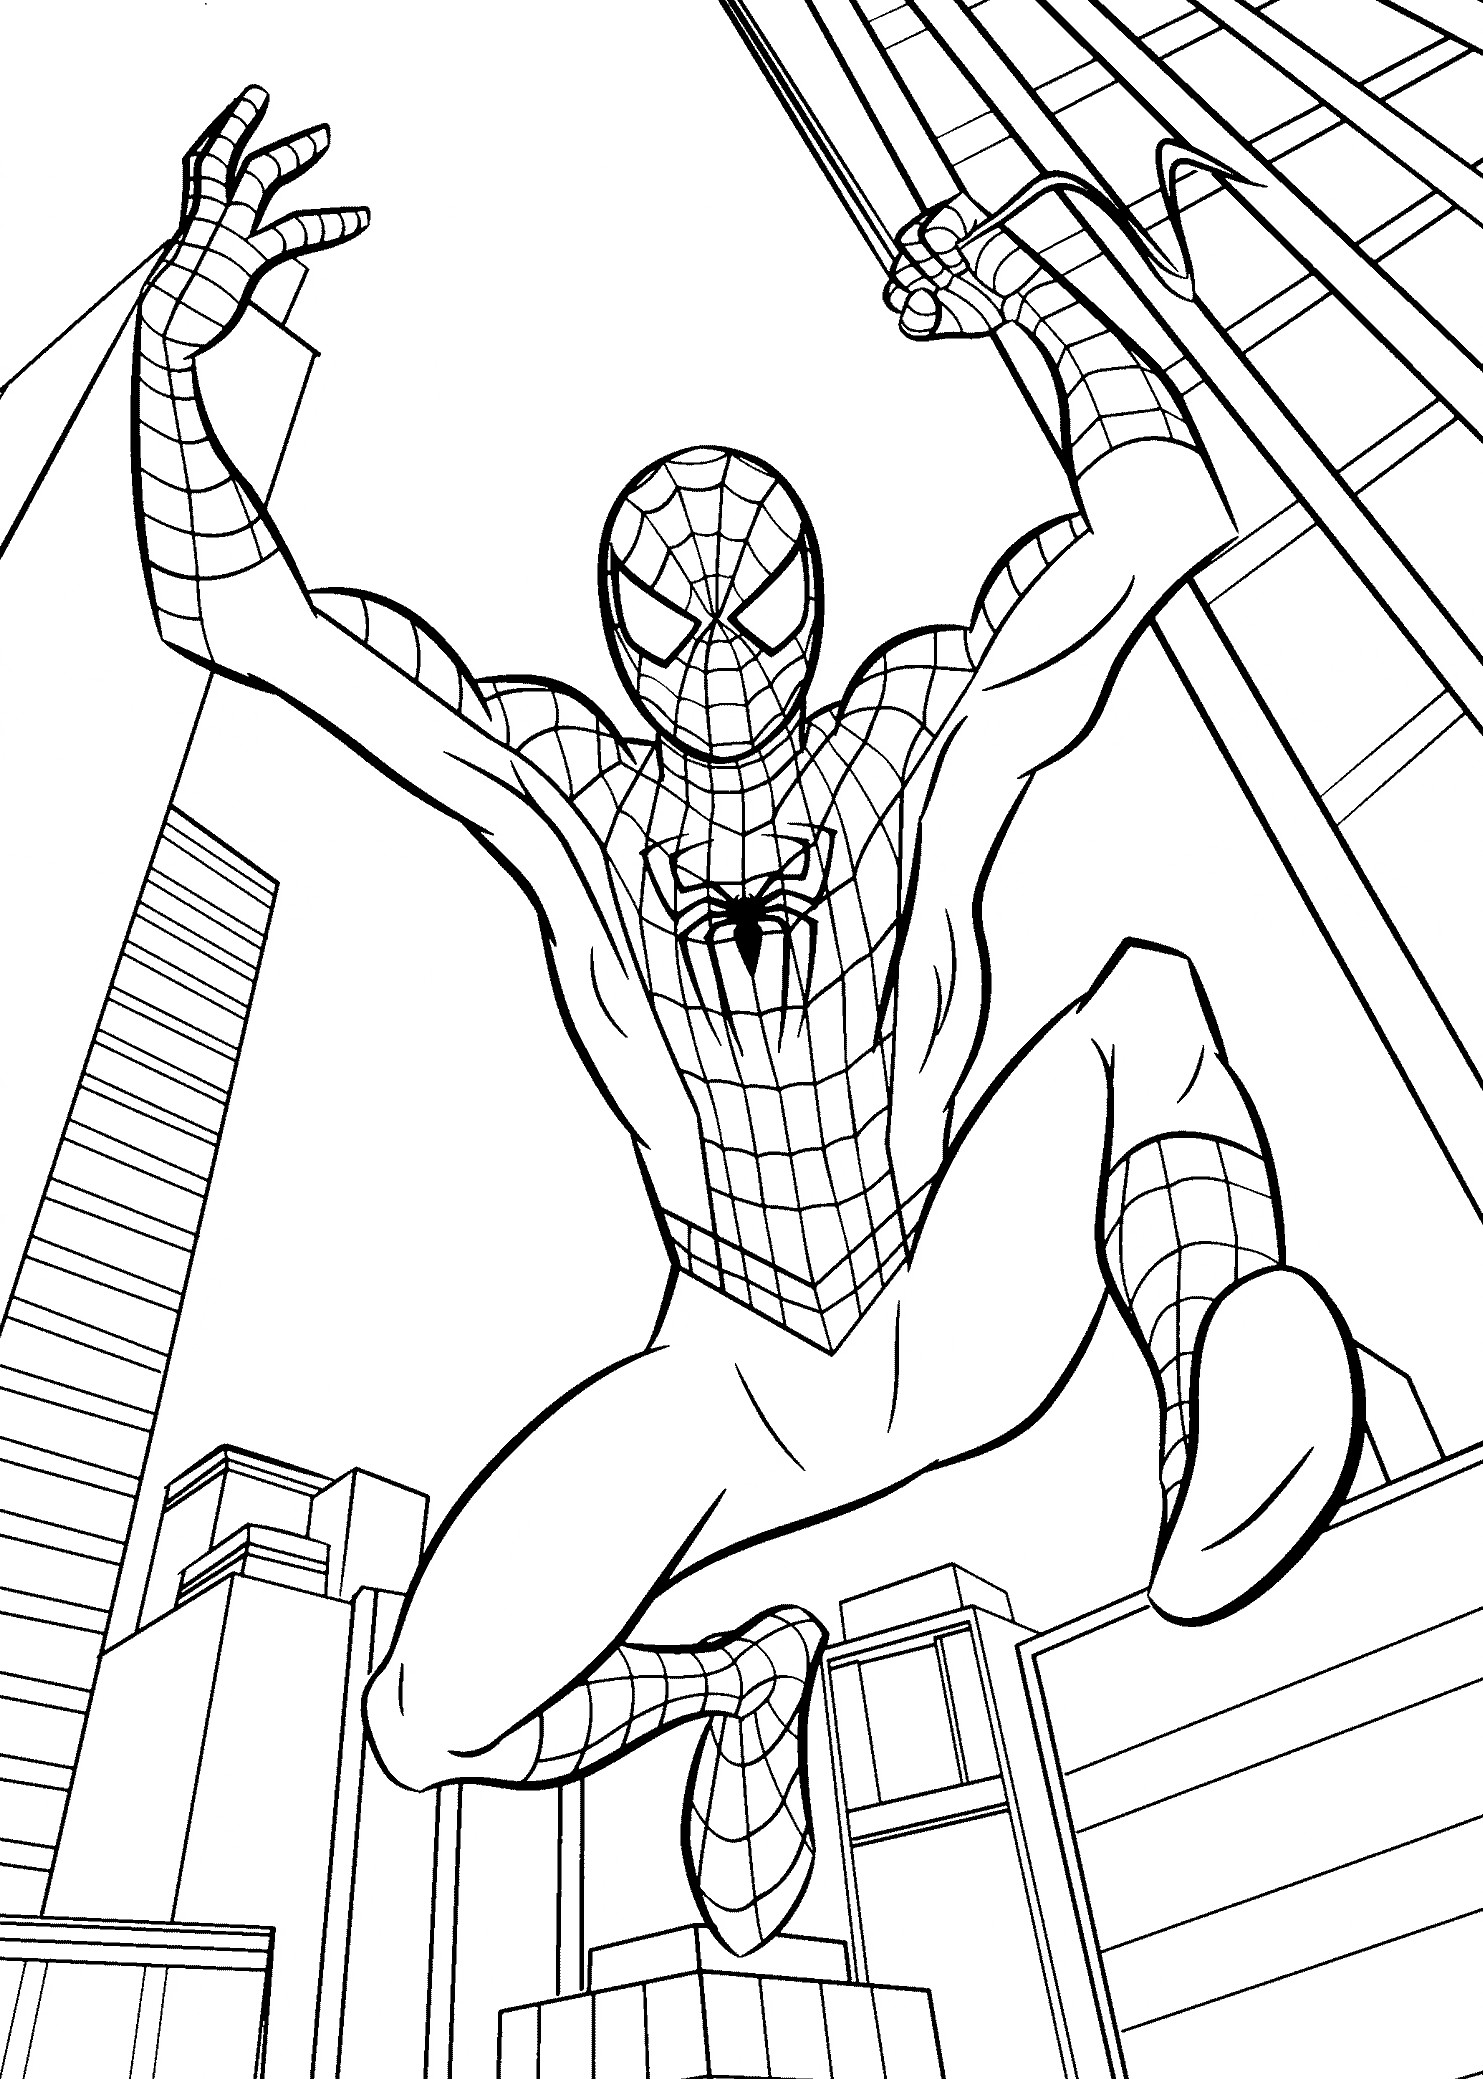 Coloring Sheets For Boys Spiderman
 Spider man jumps coloring pages for kids printable free